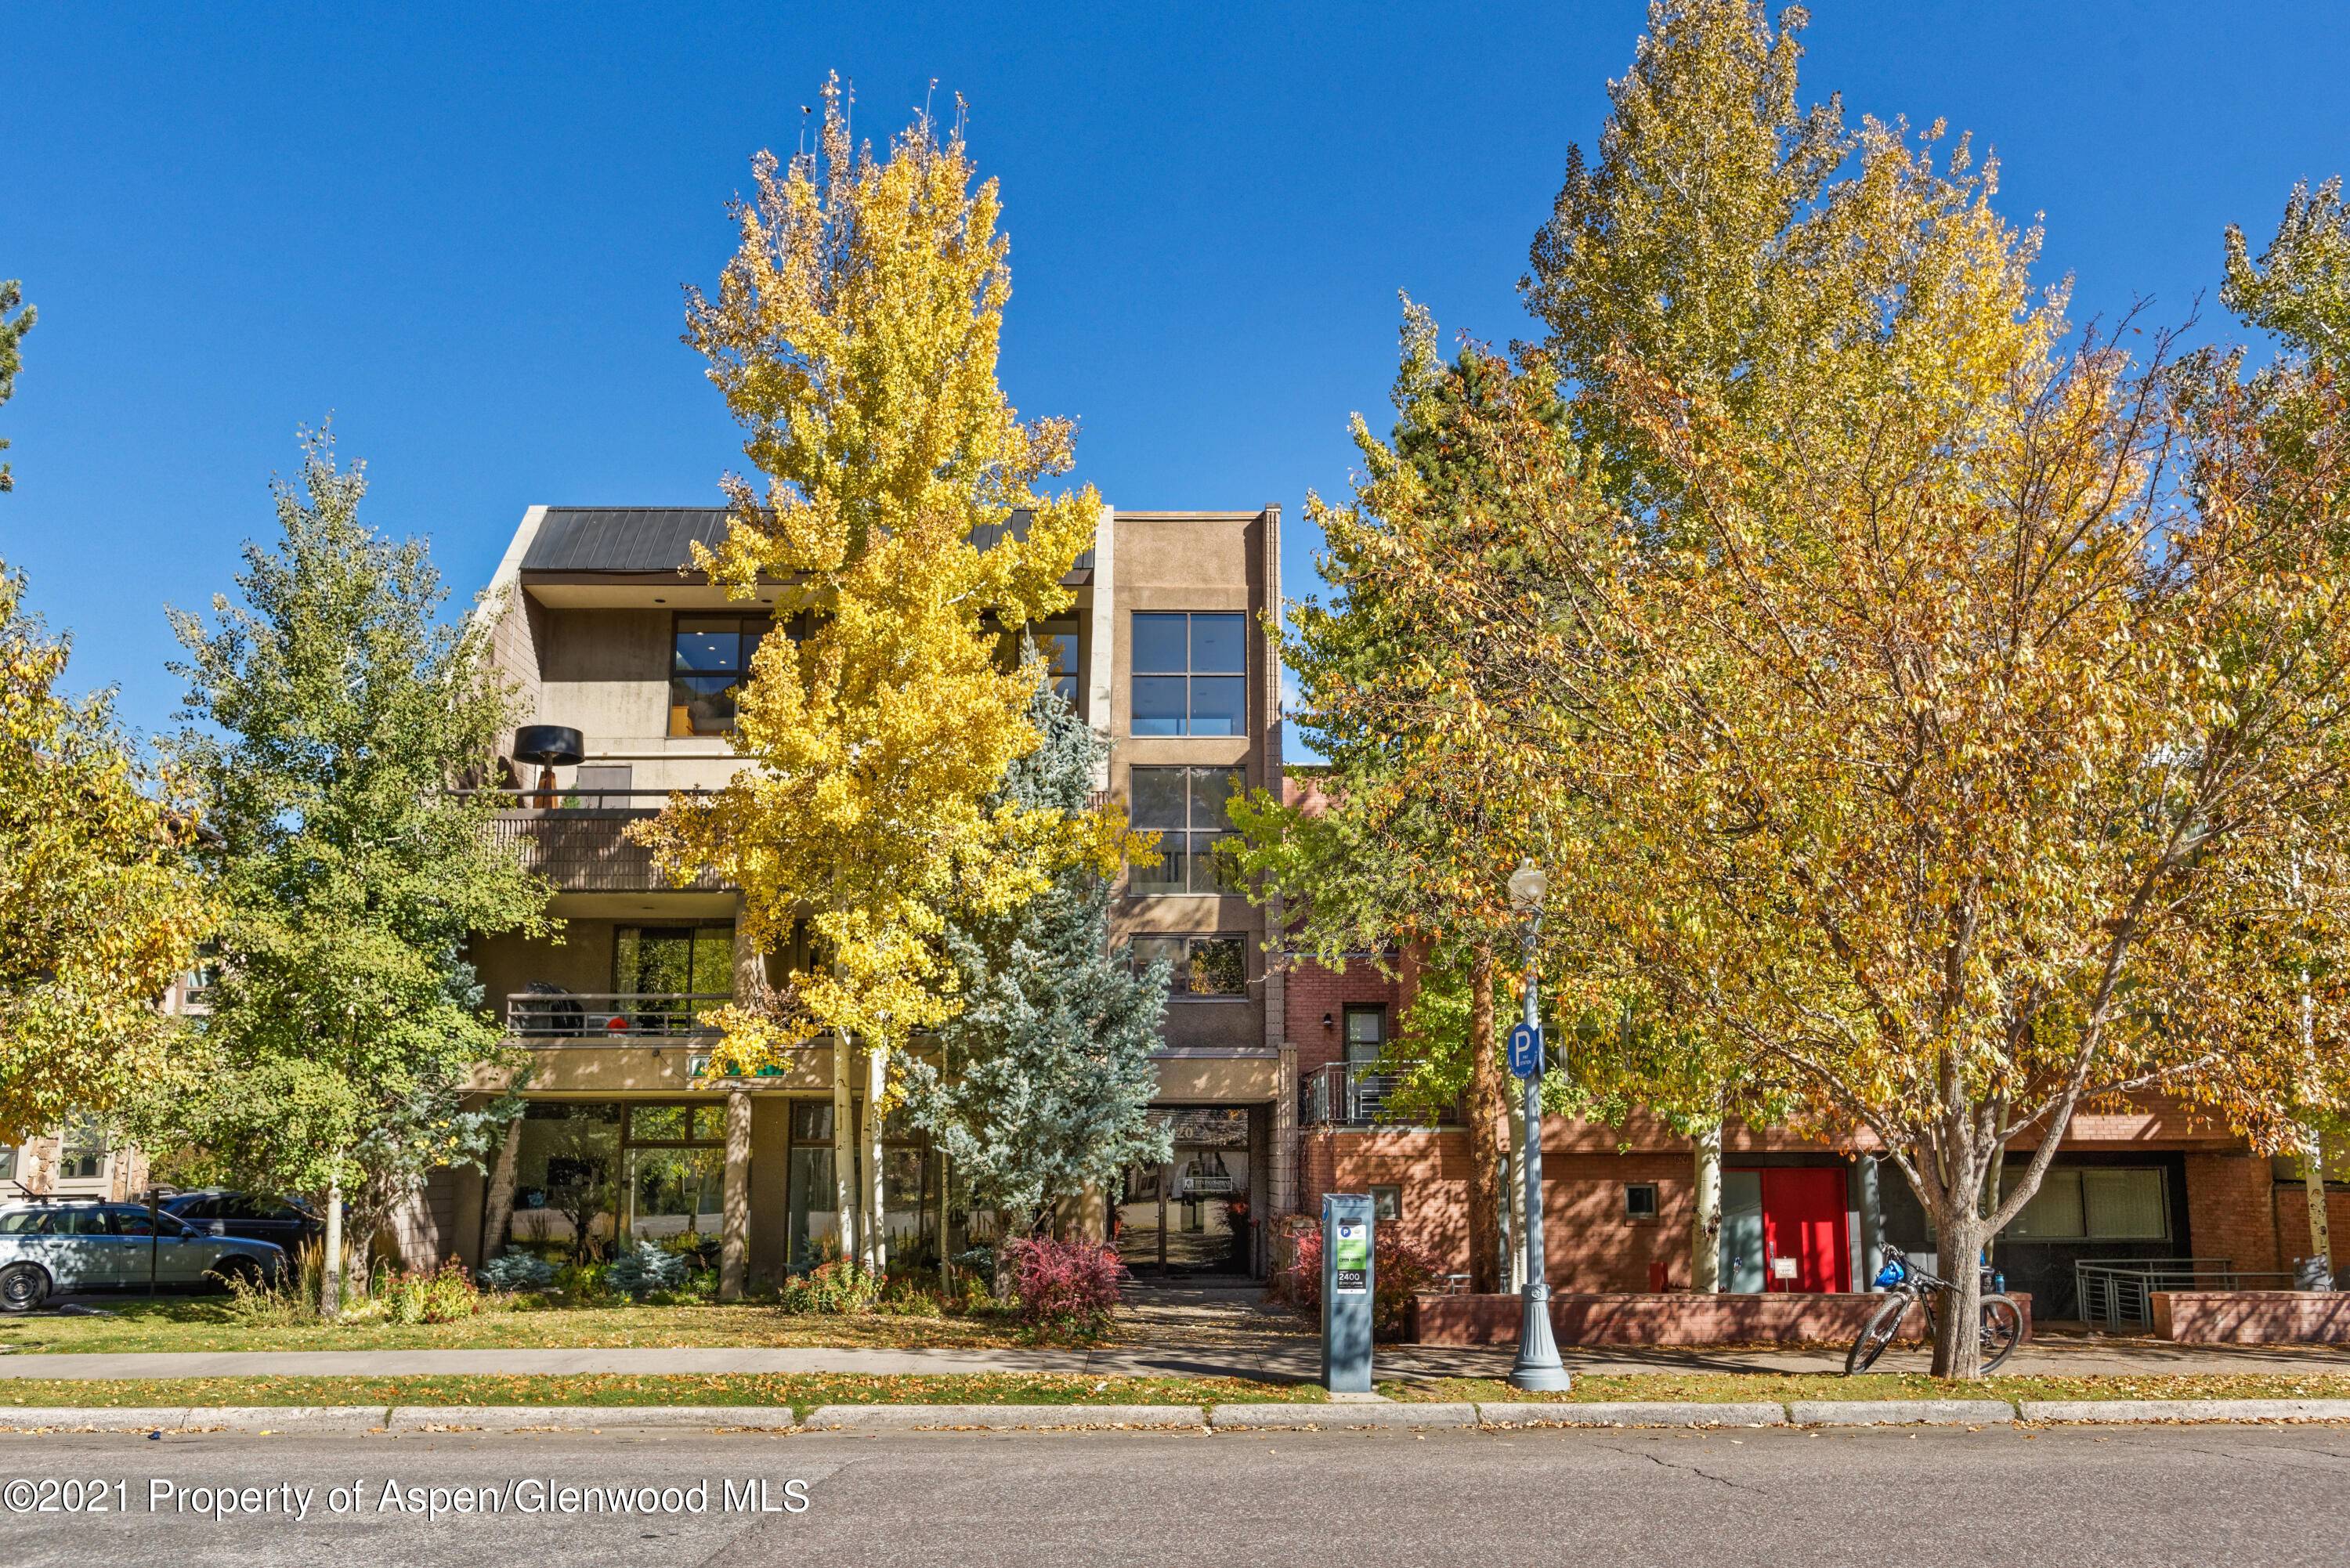 This light filled Aspen Penthouse is centrally located in Aspen's Downtown Core and has direct Aspen Mountain views.